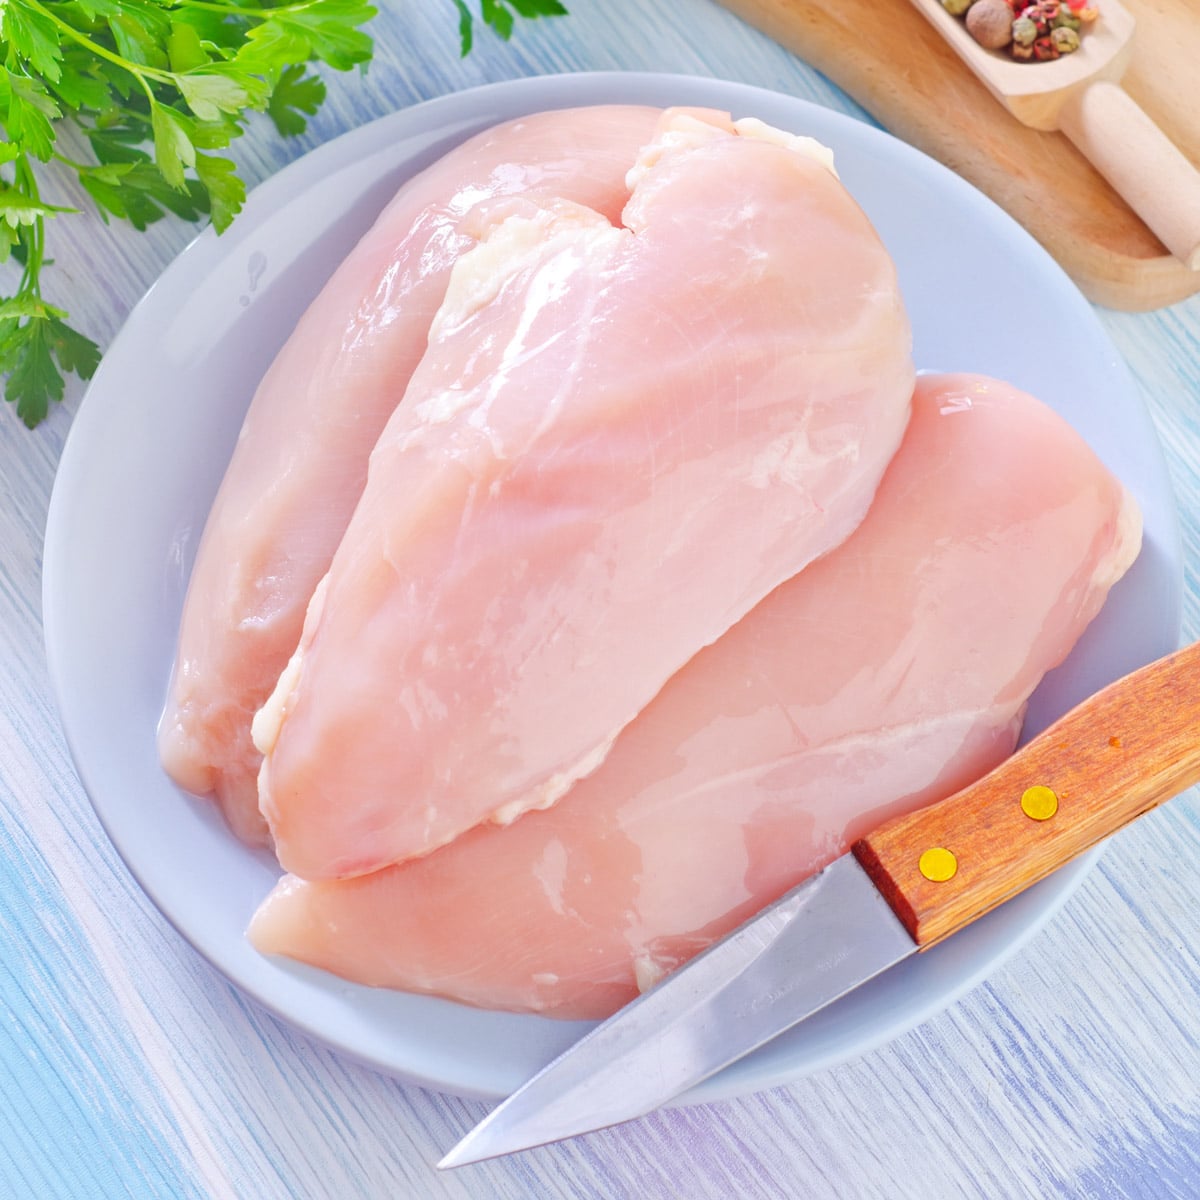 Raw chicken breasts on a plate with various aromatics around.